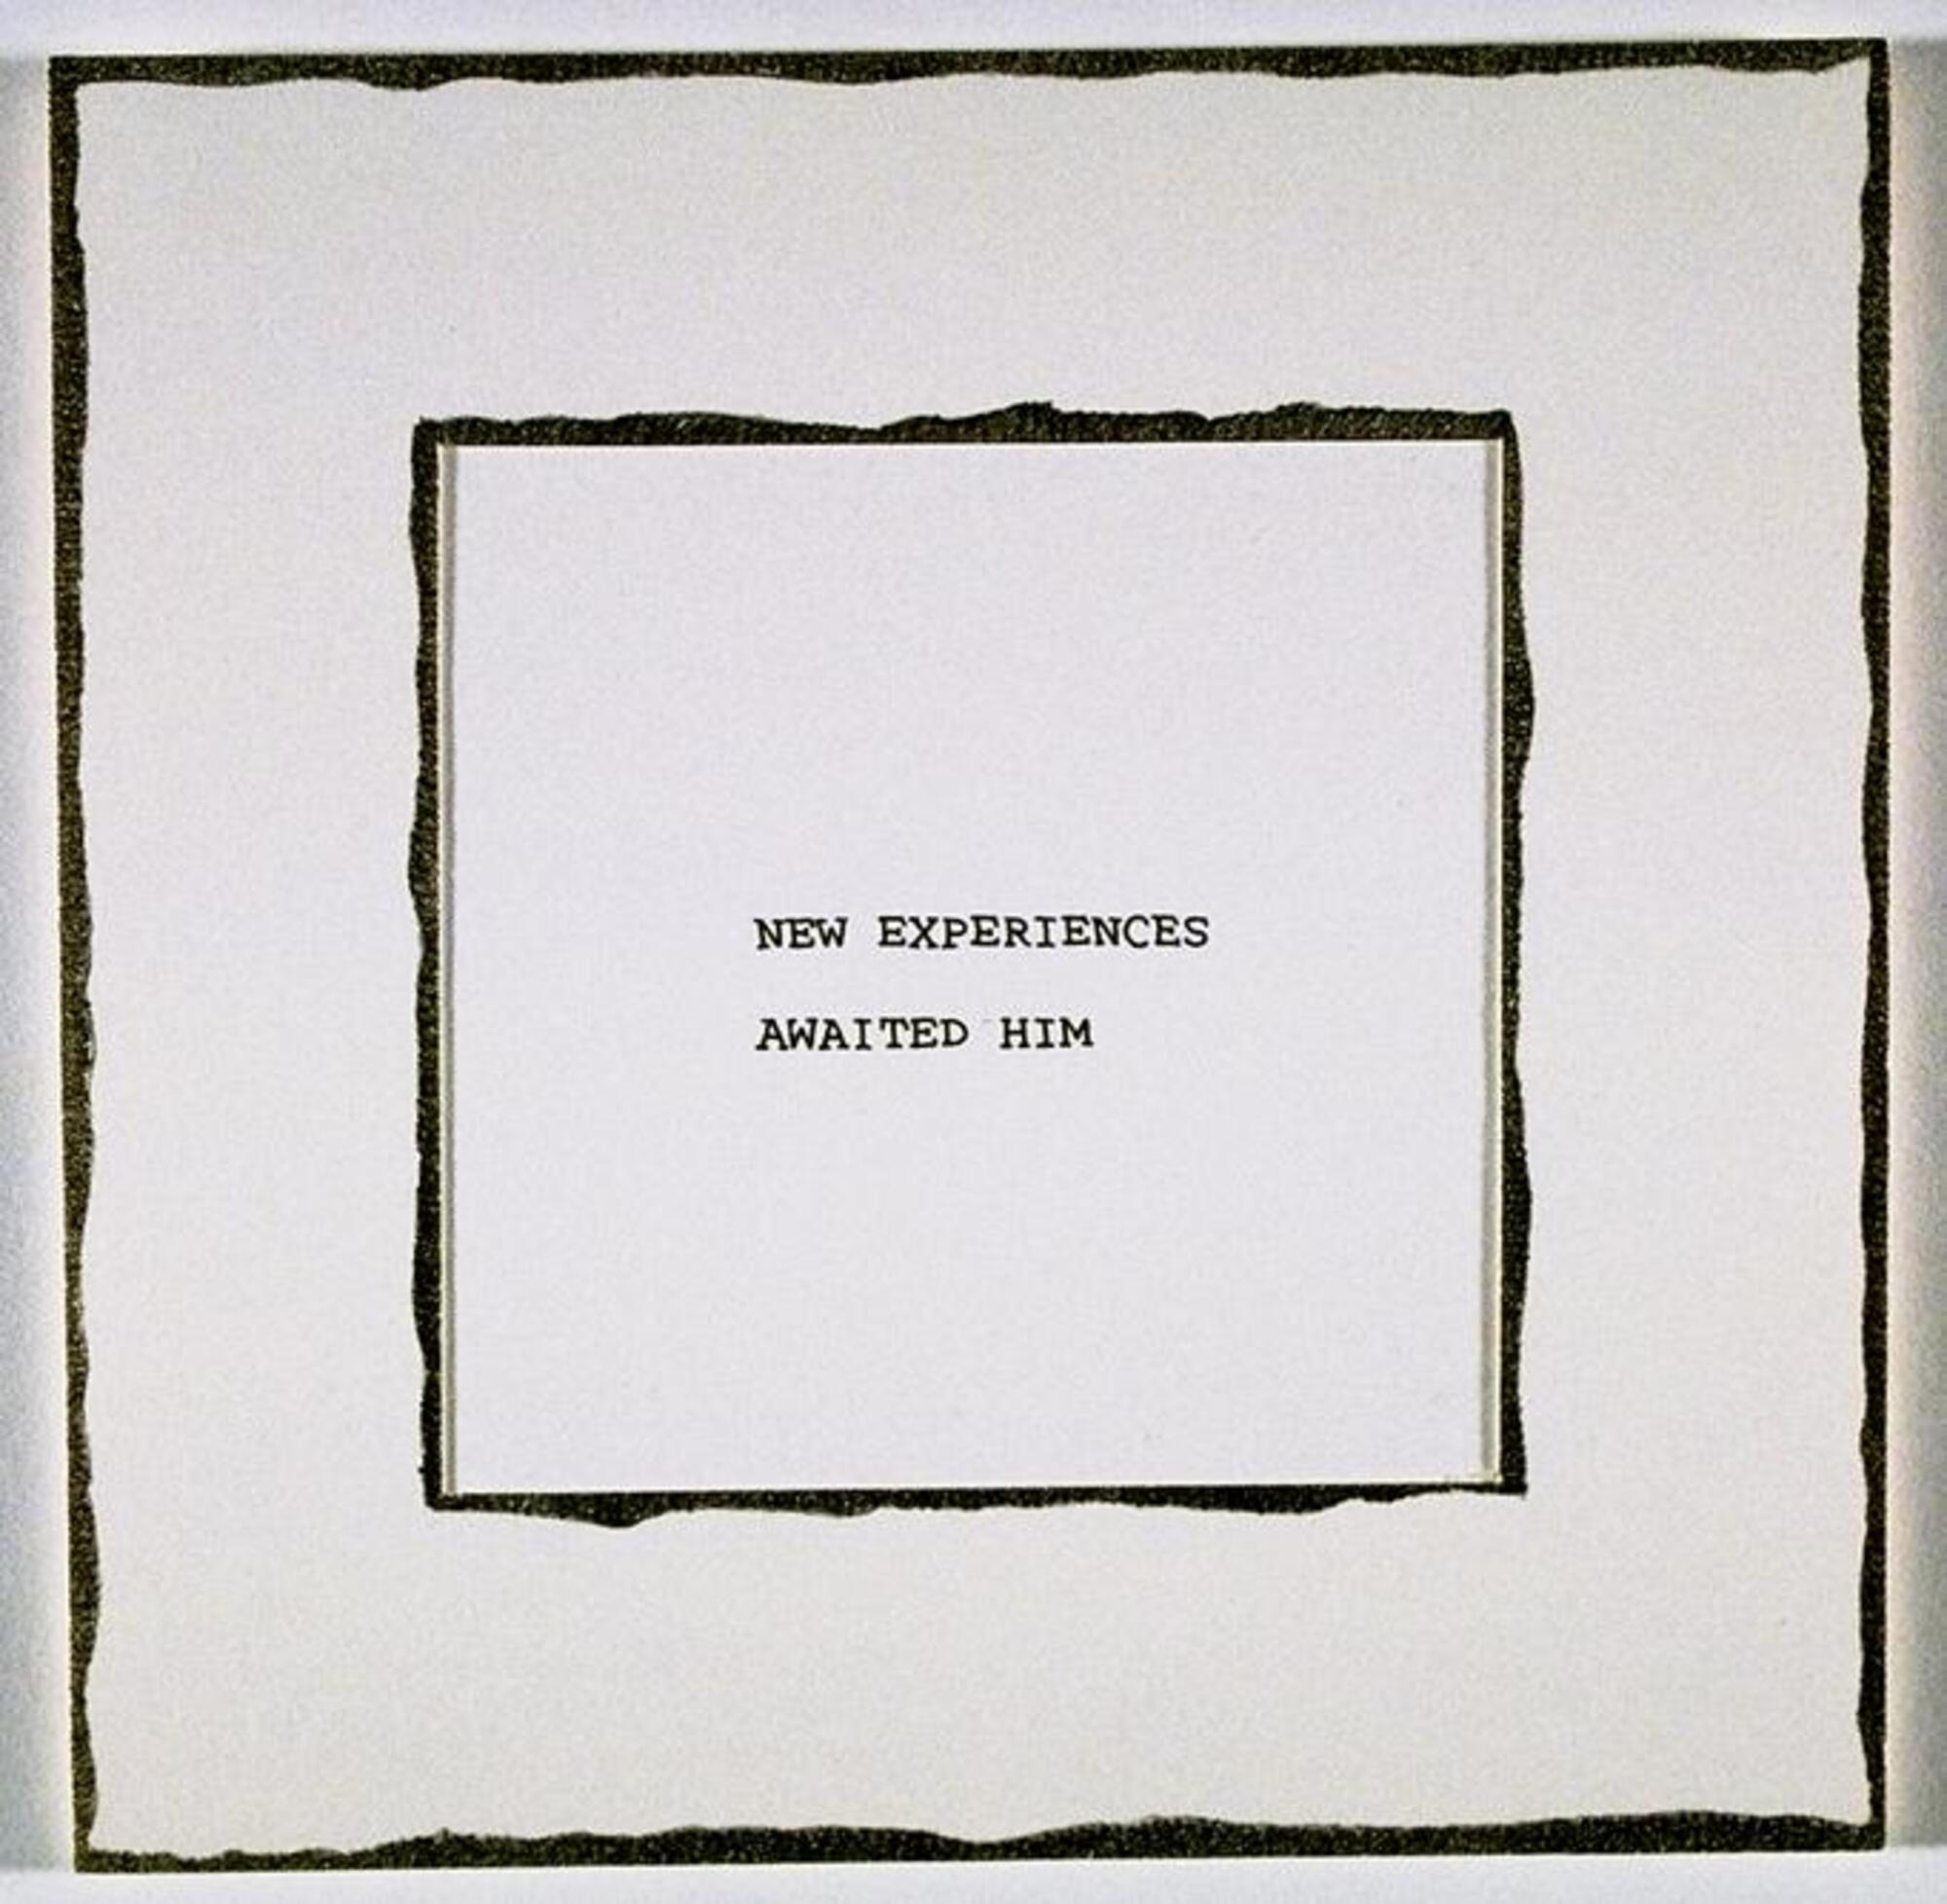 This print shows two lines of text that read, "NEW EXPERIENCES AWAITED HIM," on white paper in a square mat.